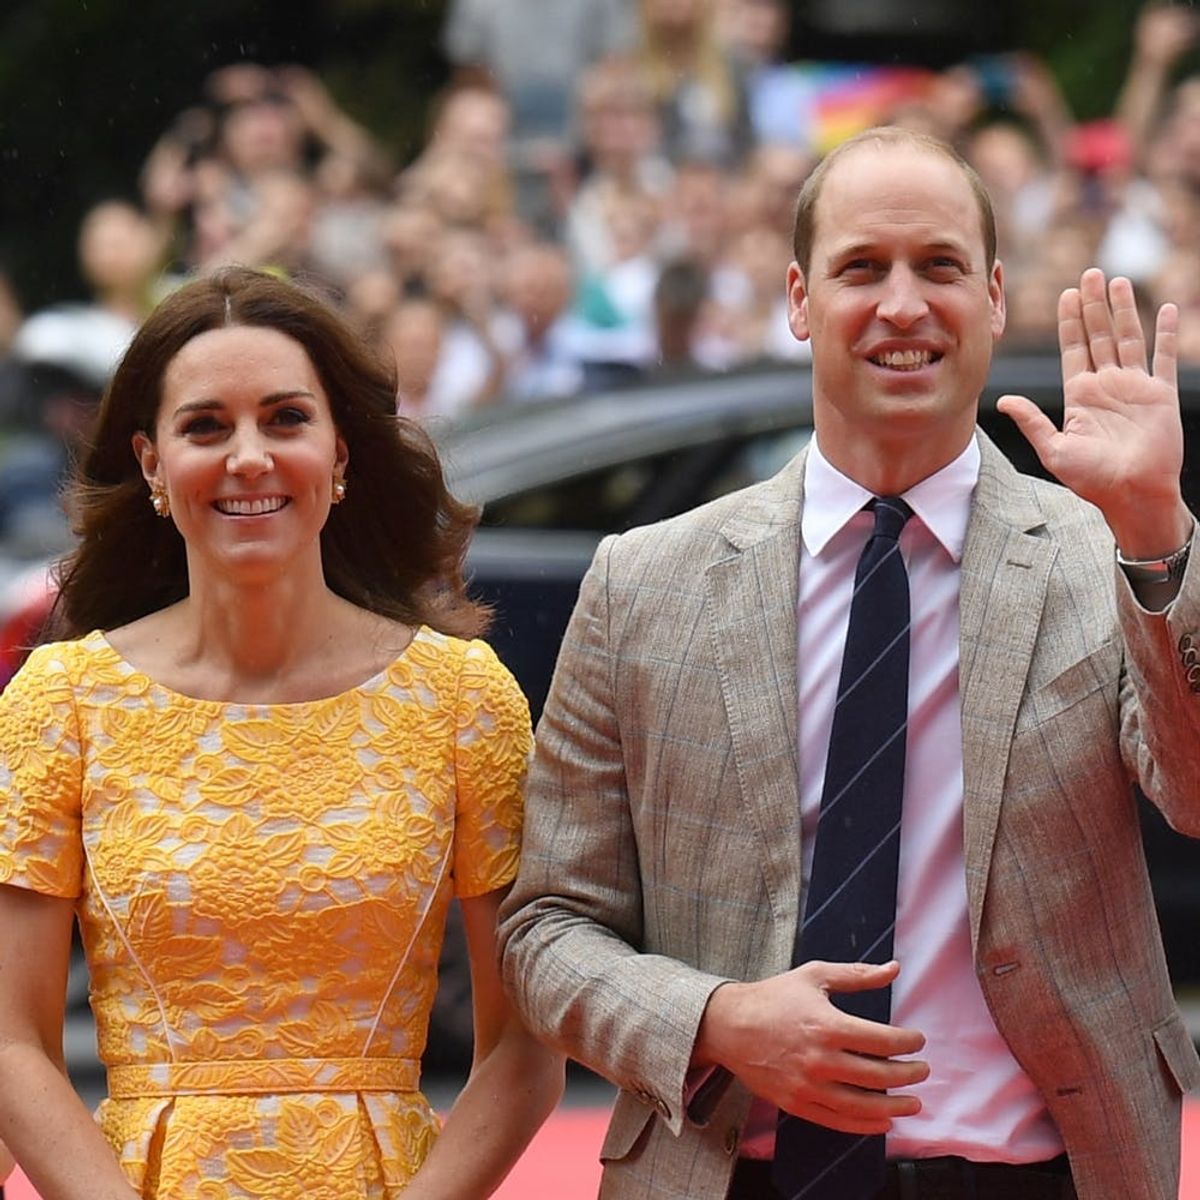 Duchess Kate Is Pregnant and Expecting Royal Baby No. 3 With Prince William!